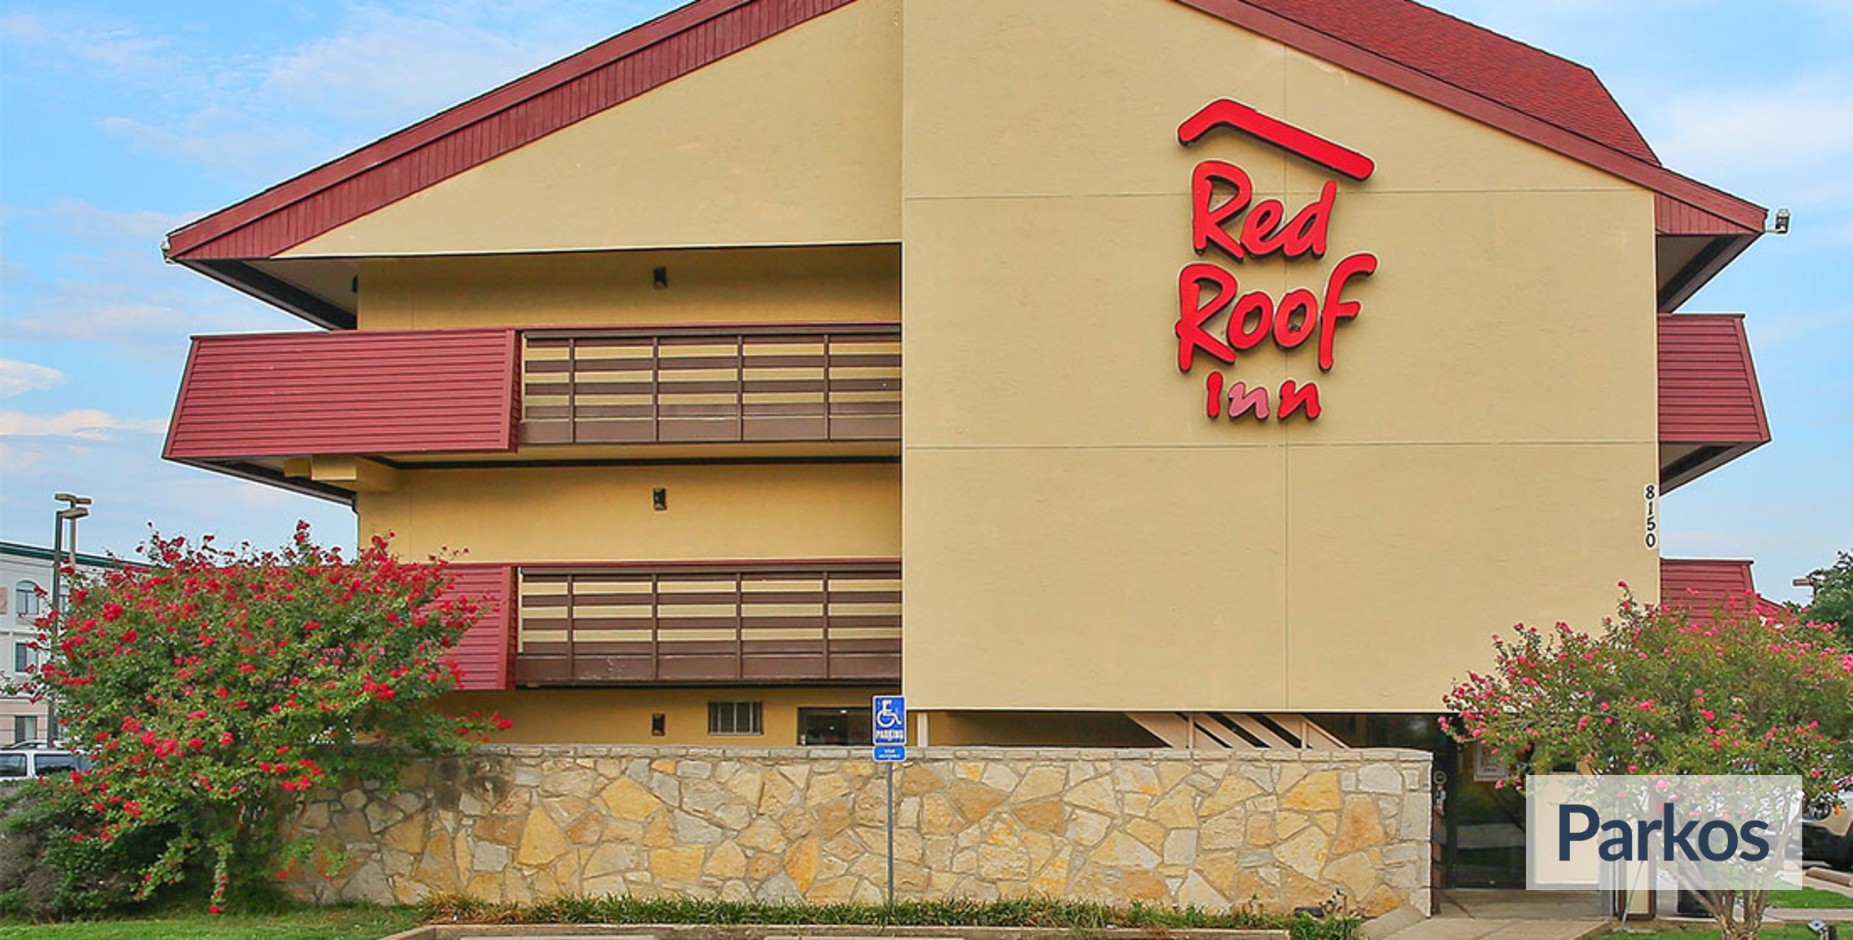 Red Roof Inn (DFW) - DFW Airport Parking - picture 1